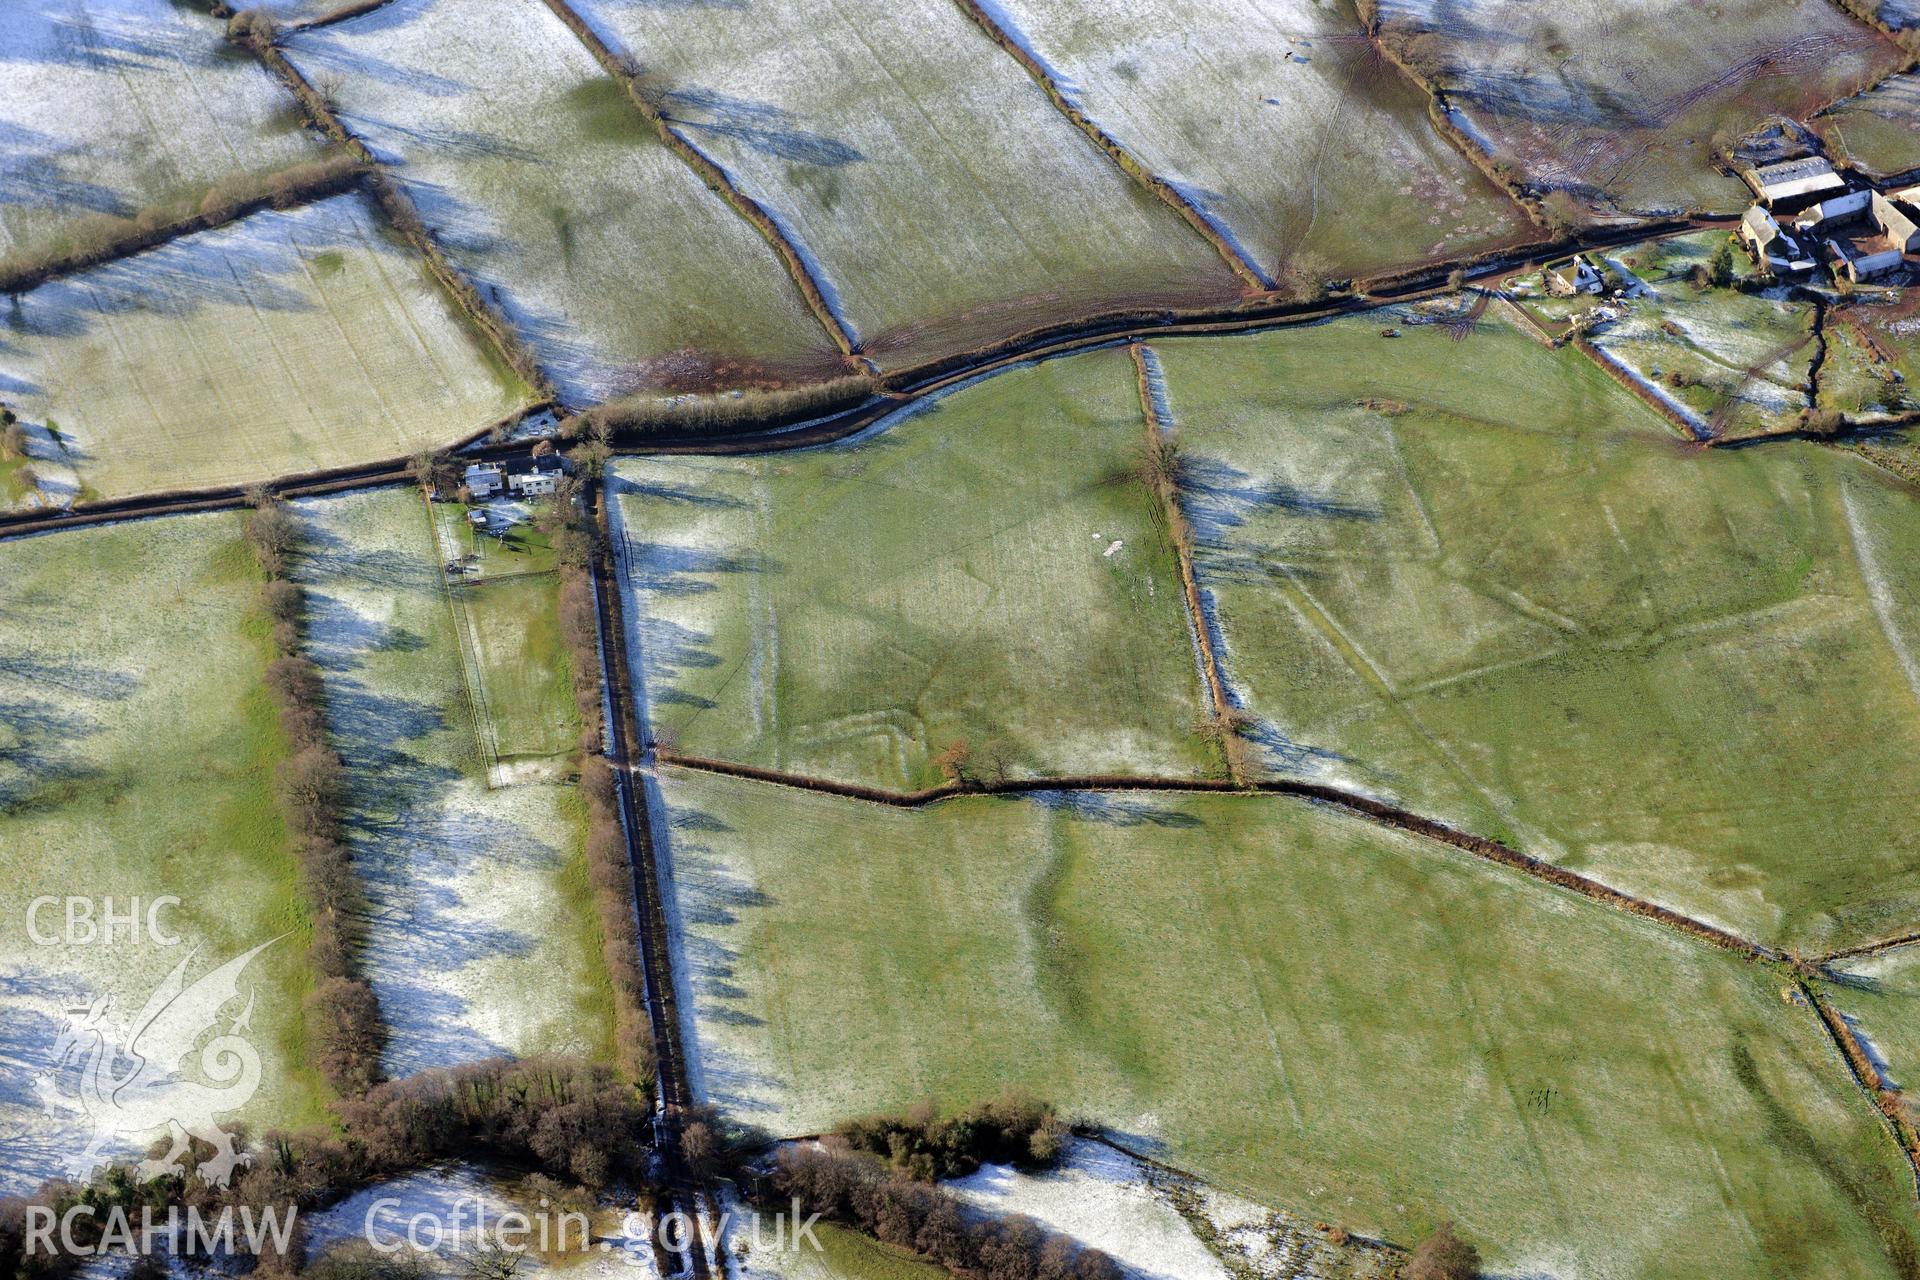 Treberfydd moated site, Llangors, south east of Brecon. Oblique aerial photograph taken during the Royal Commission?s programme of archaeological aerial reconnaissance by Toby Driver on 15th January 2013.